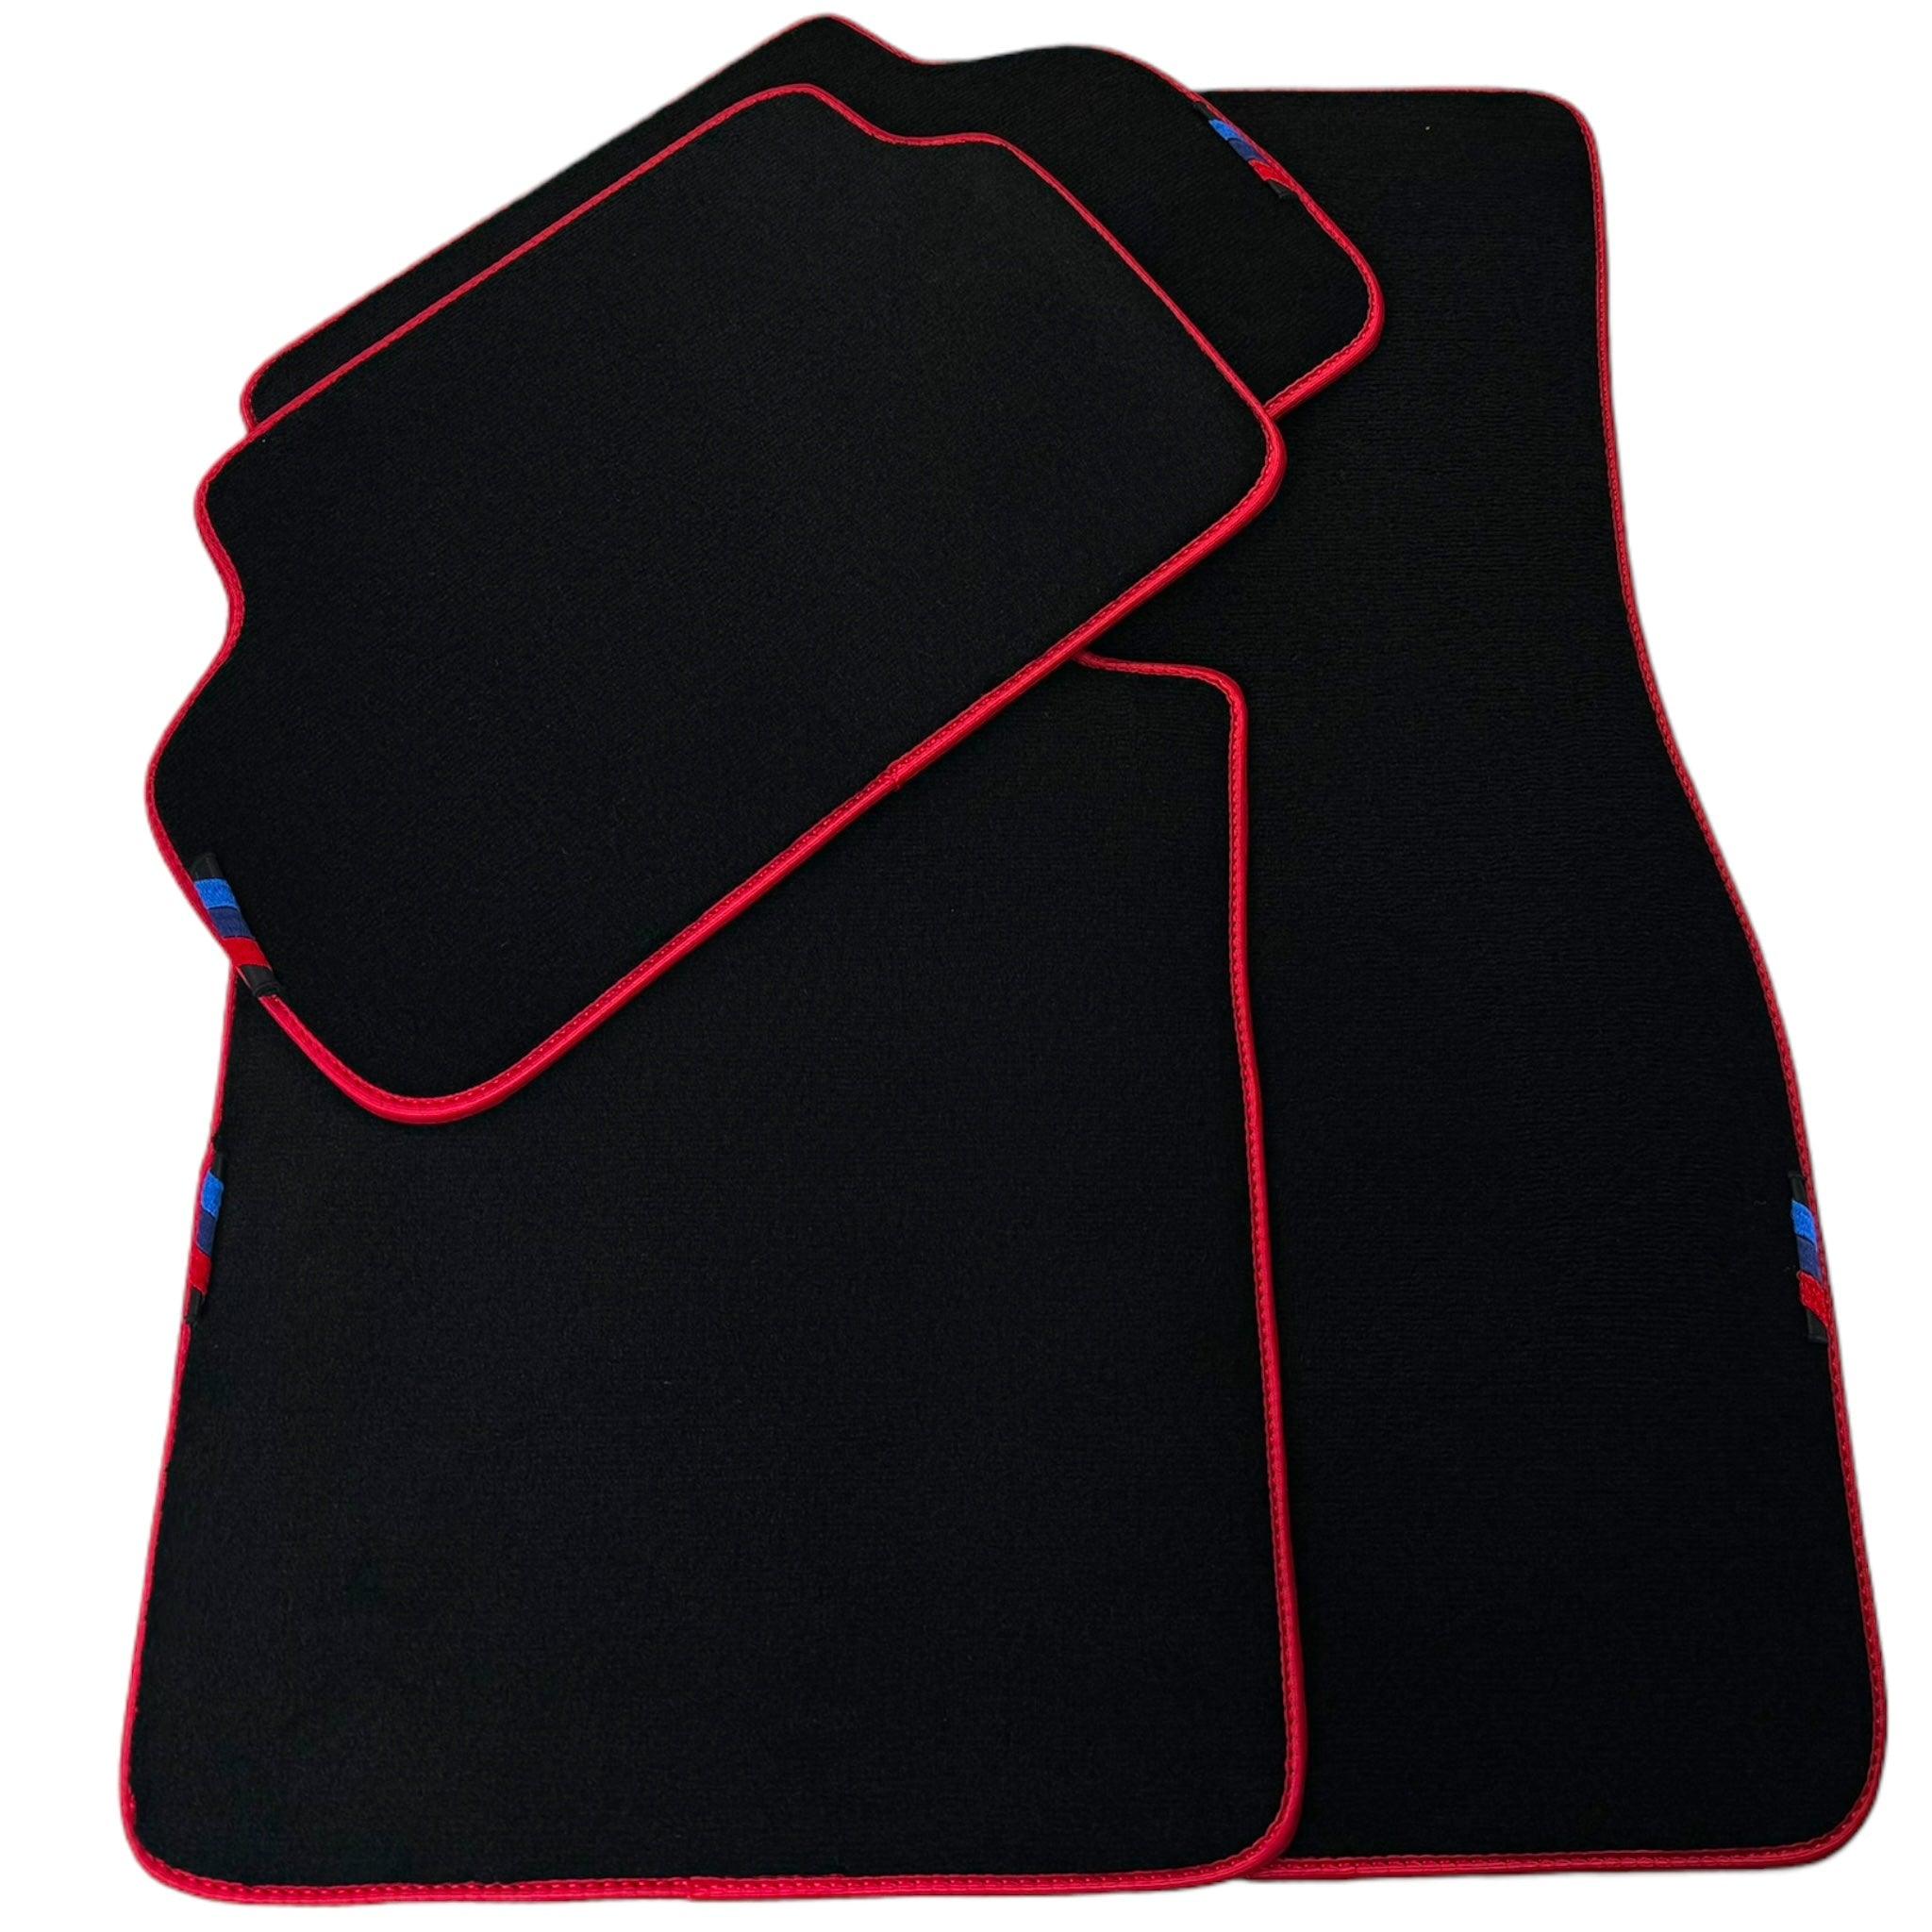 Black Floor Mats For BMW 3 Series E46 Convertible | Red Trim